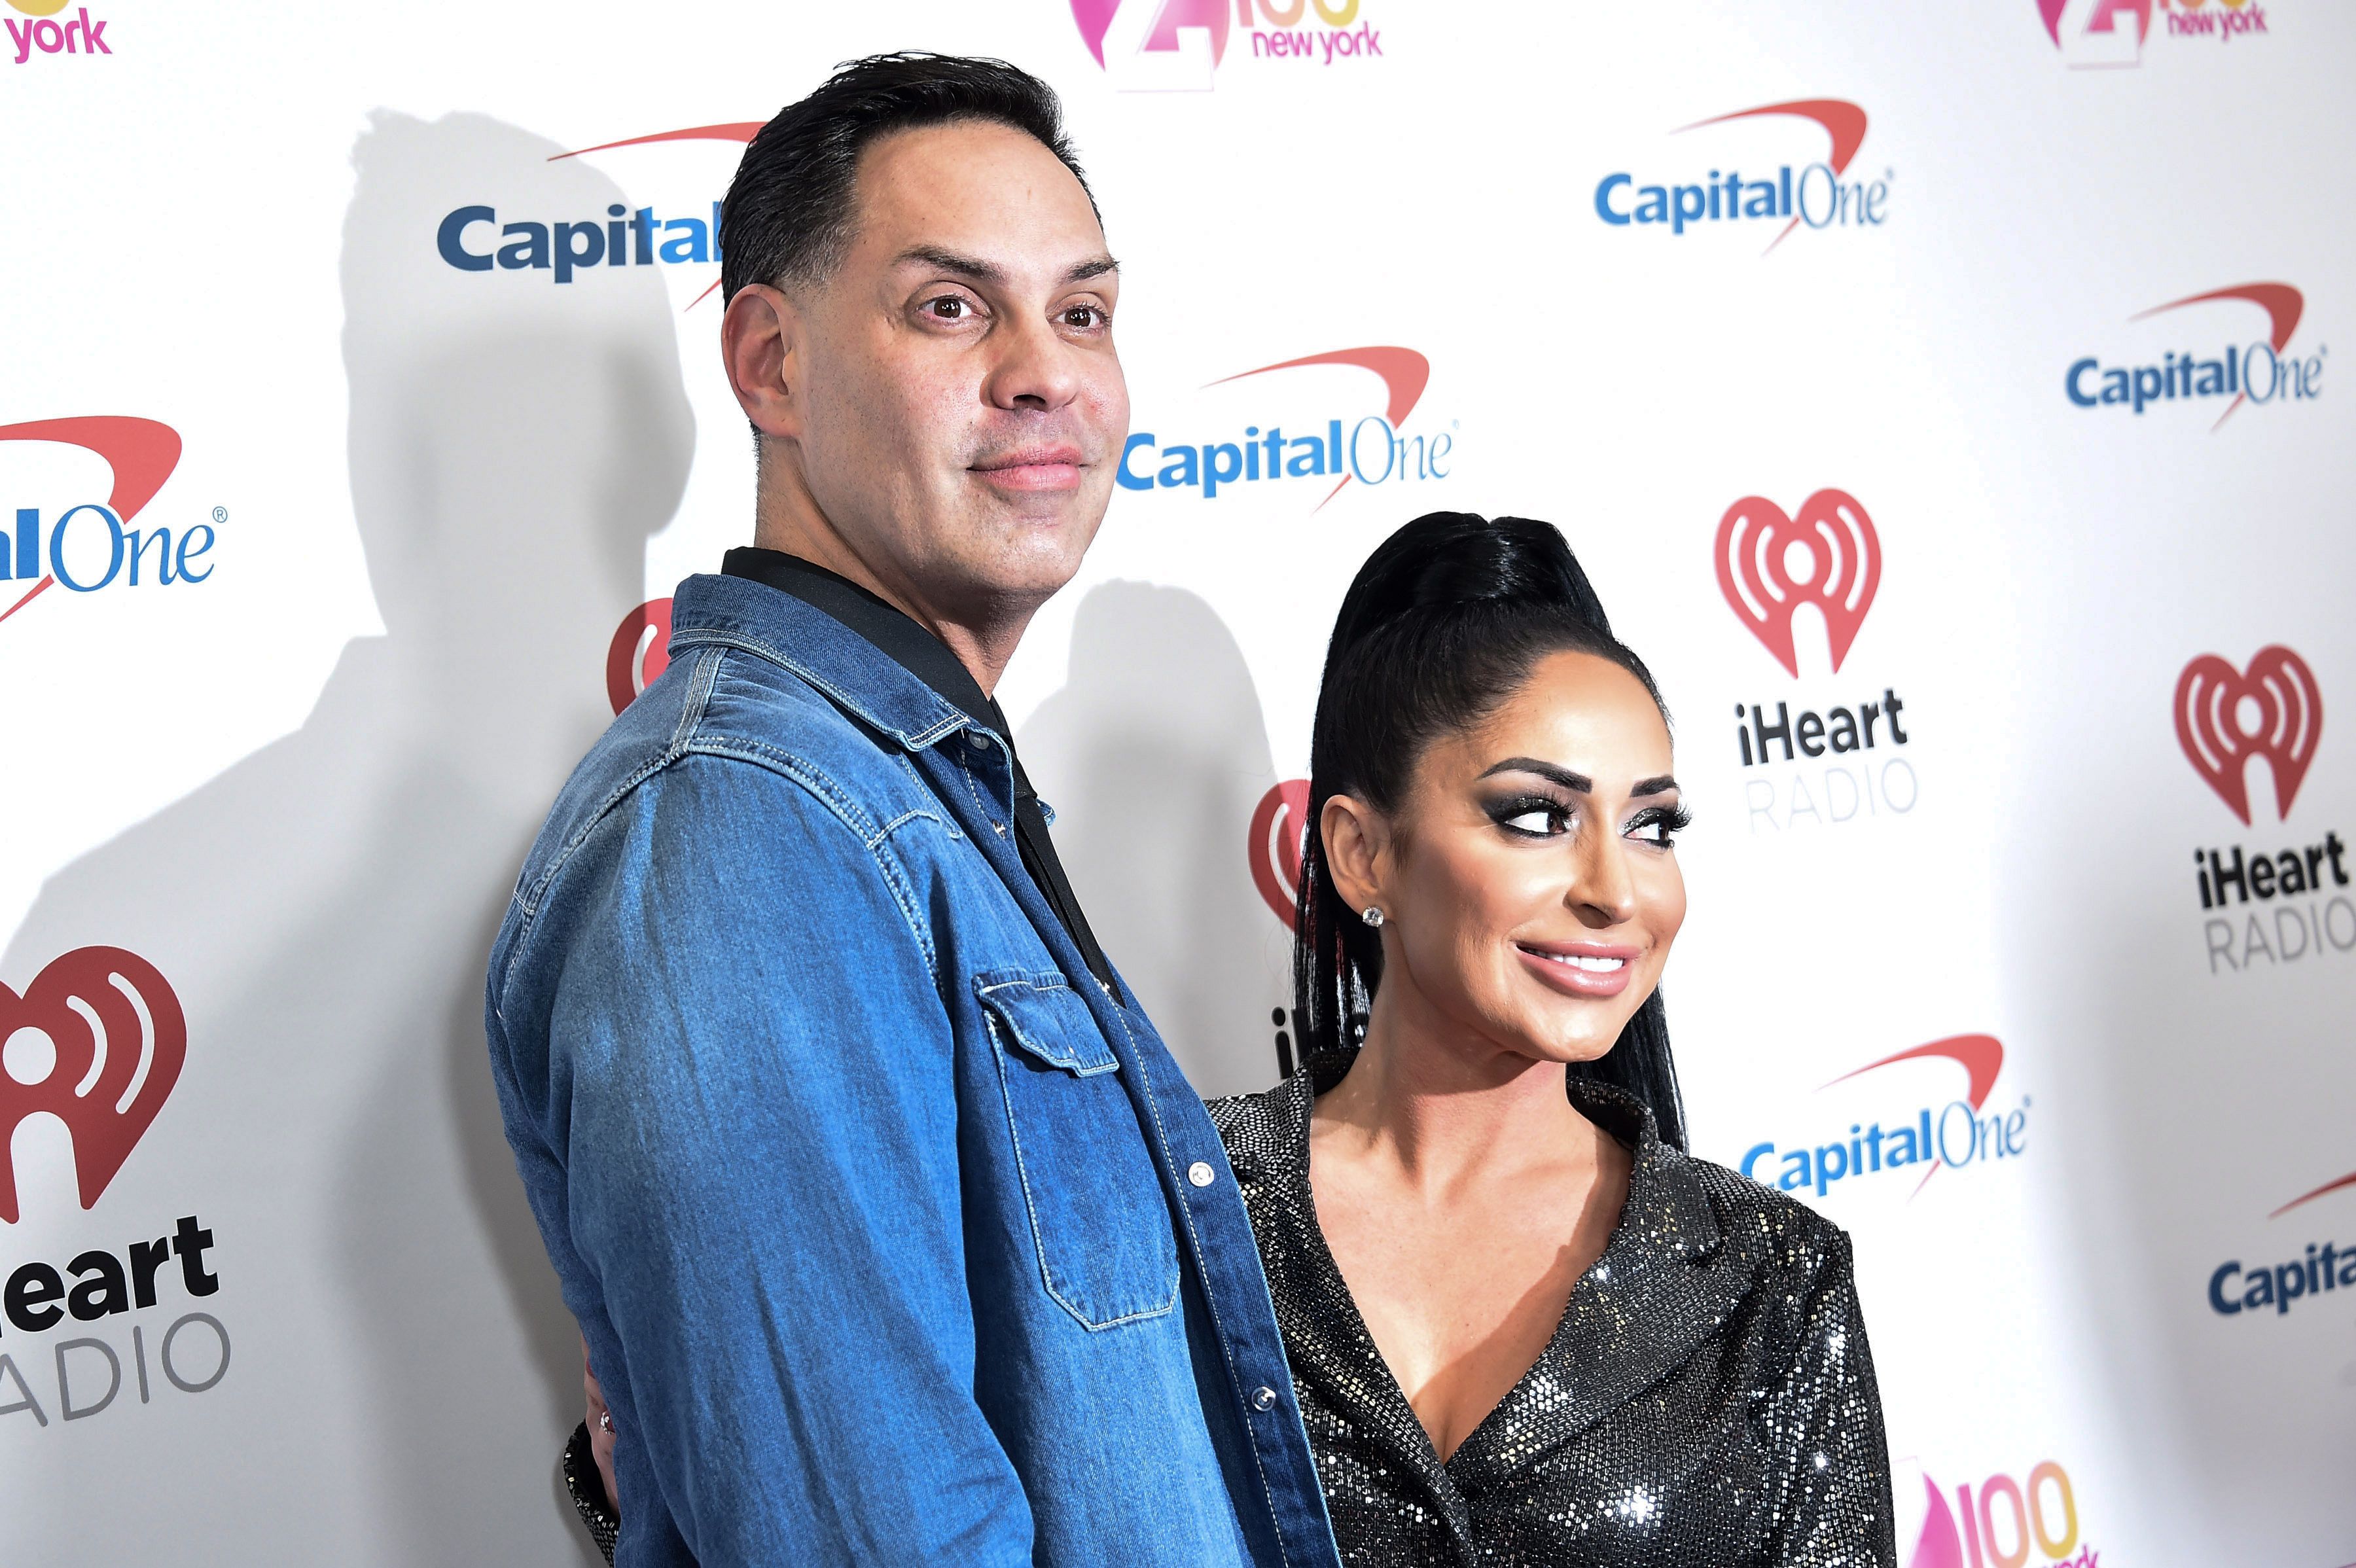 Chris Larangeira and Angelina Pivarnick, who were at the same Atlantic City hotel this weekend, at an event in 2019